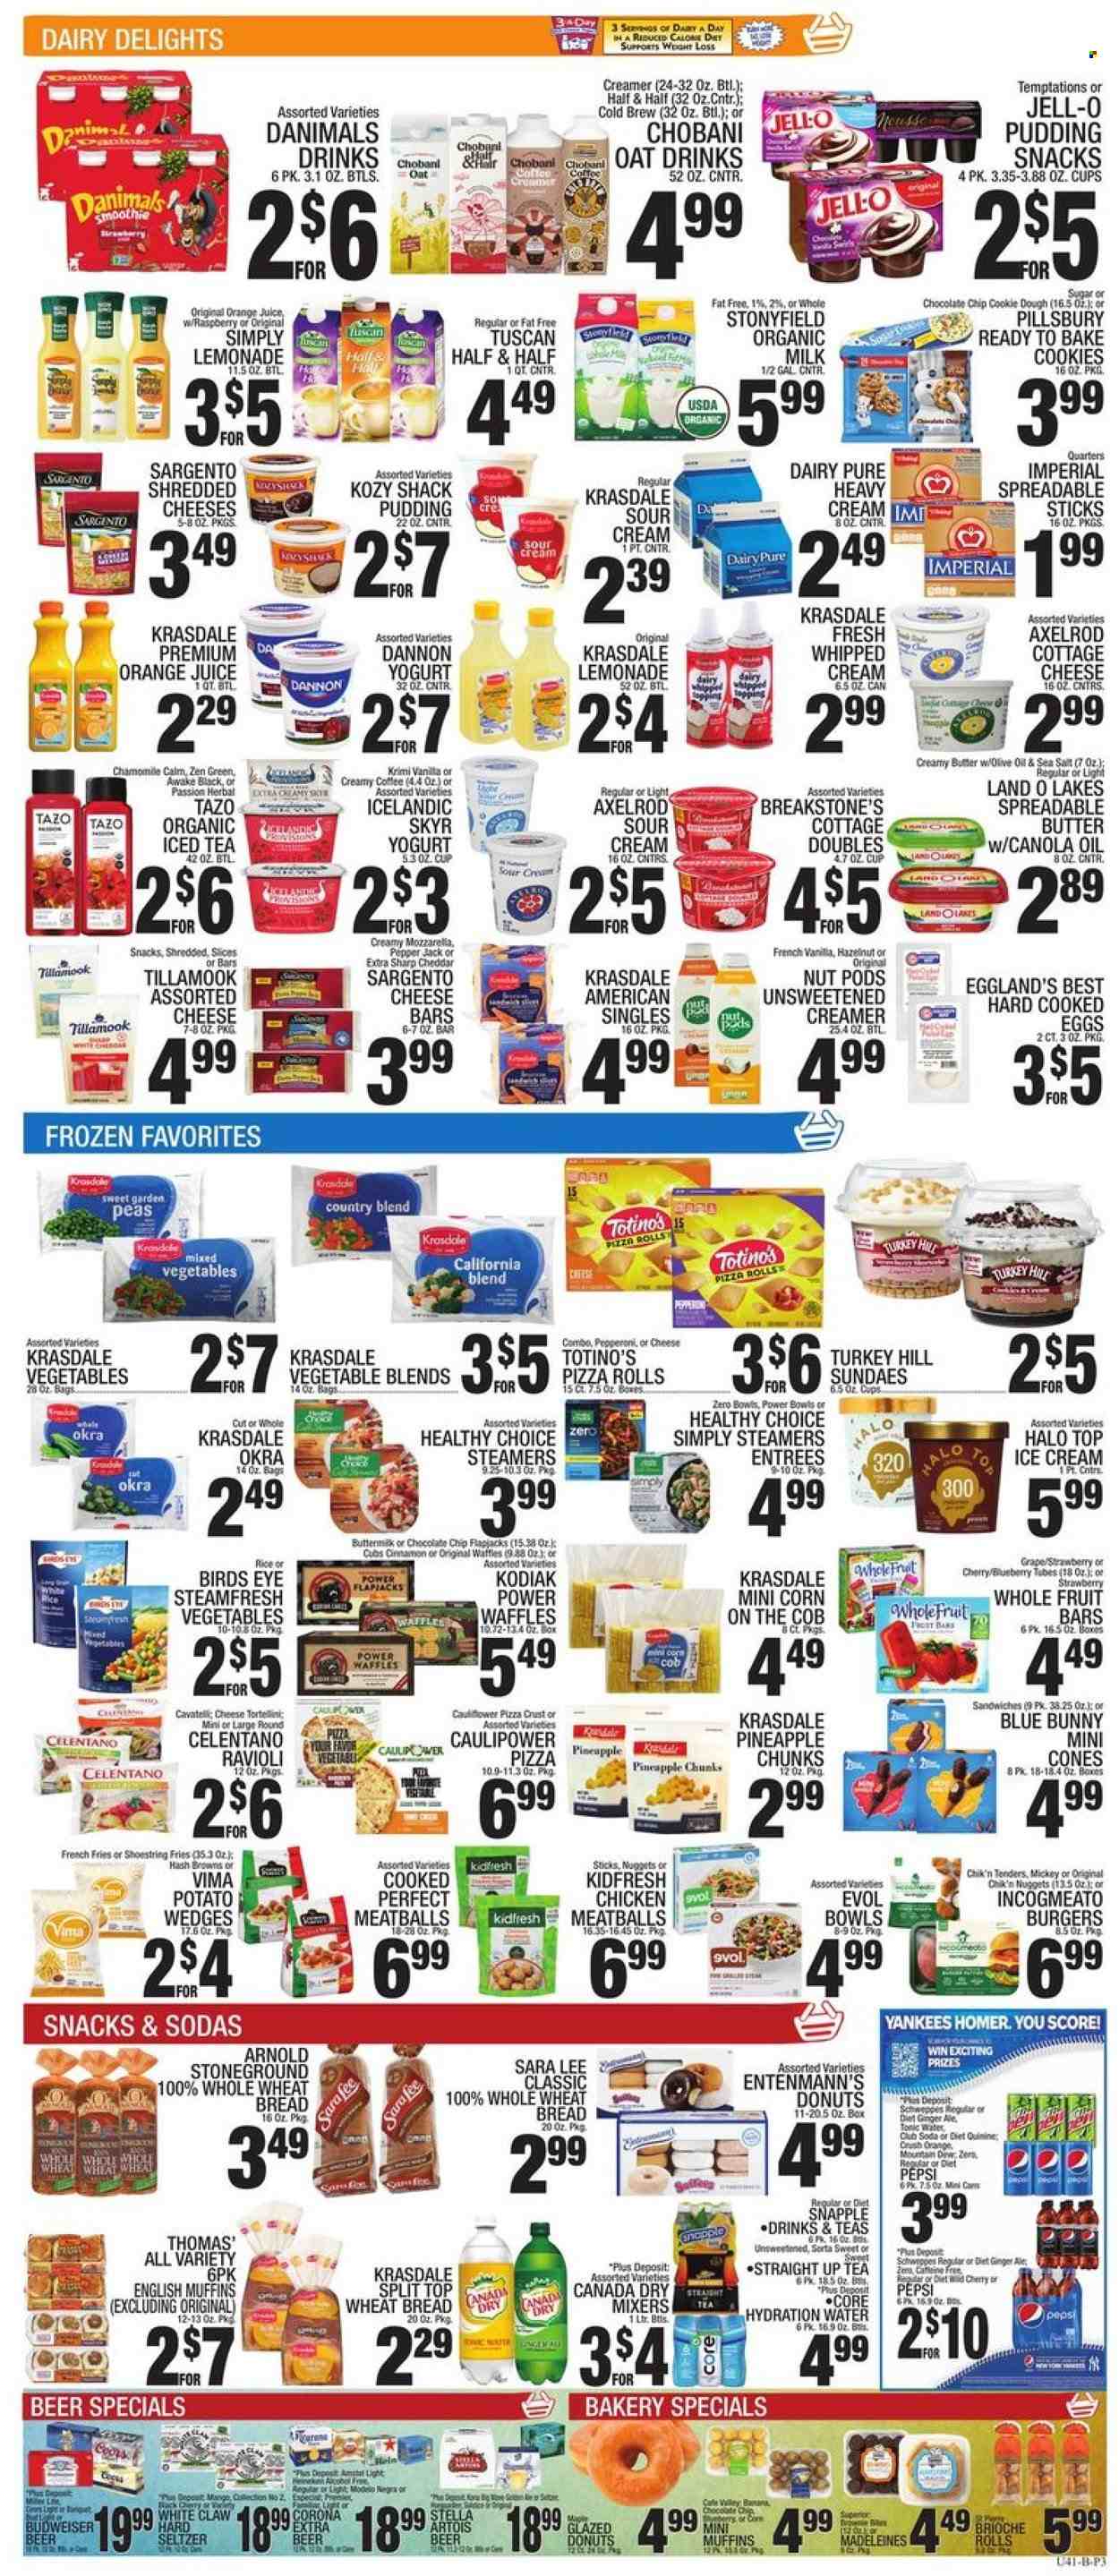 thumbnail - C-Town Flyer - 08/12/2022 - 08/18/2022 - Sales products - english muffins, wheat bread, pizza rolls, brioche, Sara Lee, brownies, donut, waffles, Entenmann's, corn, peas, pineapple, ravioli, pizza, meatballs, sandwich, nuggets, hamburger, Pillsbury, Bird's Eye, Healthy Choice, pepperoni, cottage cheese, sandwich slices, cheddar, Pepper Jack cheese, Sargento, pudding, yoghurt, Chobani, Dannon, Danimals, buttermilk, organic milk, eggs, spreadable butter, sour cream, whipped cream, creamer, ice cream, Mickey Mouse, Blue Bunny, mixed vegetables, hash browns, potato fries, potato wedges, french fries, cookie dough, cookies, snack, sugar, oats, topping, Jell-O, white rice, cinnamon, canola oil, olive oil, oil, Canada Dry, ginger ale, lemonade, Mountain Dew, Schweppes, Pepsi, orange juice, juice, ice tea, tonic, Diet Pepsi, Snapple, Club Soda, coffee, wine, rosé wine, Hard Seltzer, beer, Corona Extra, Heineken, Miller, Modelo, Budweiser, Stella Artois, Half and half, Coors. Page 3.